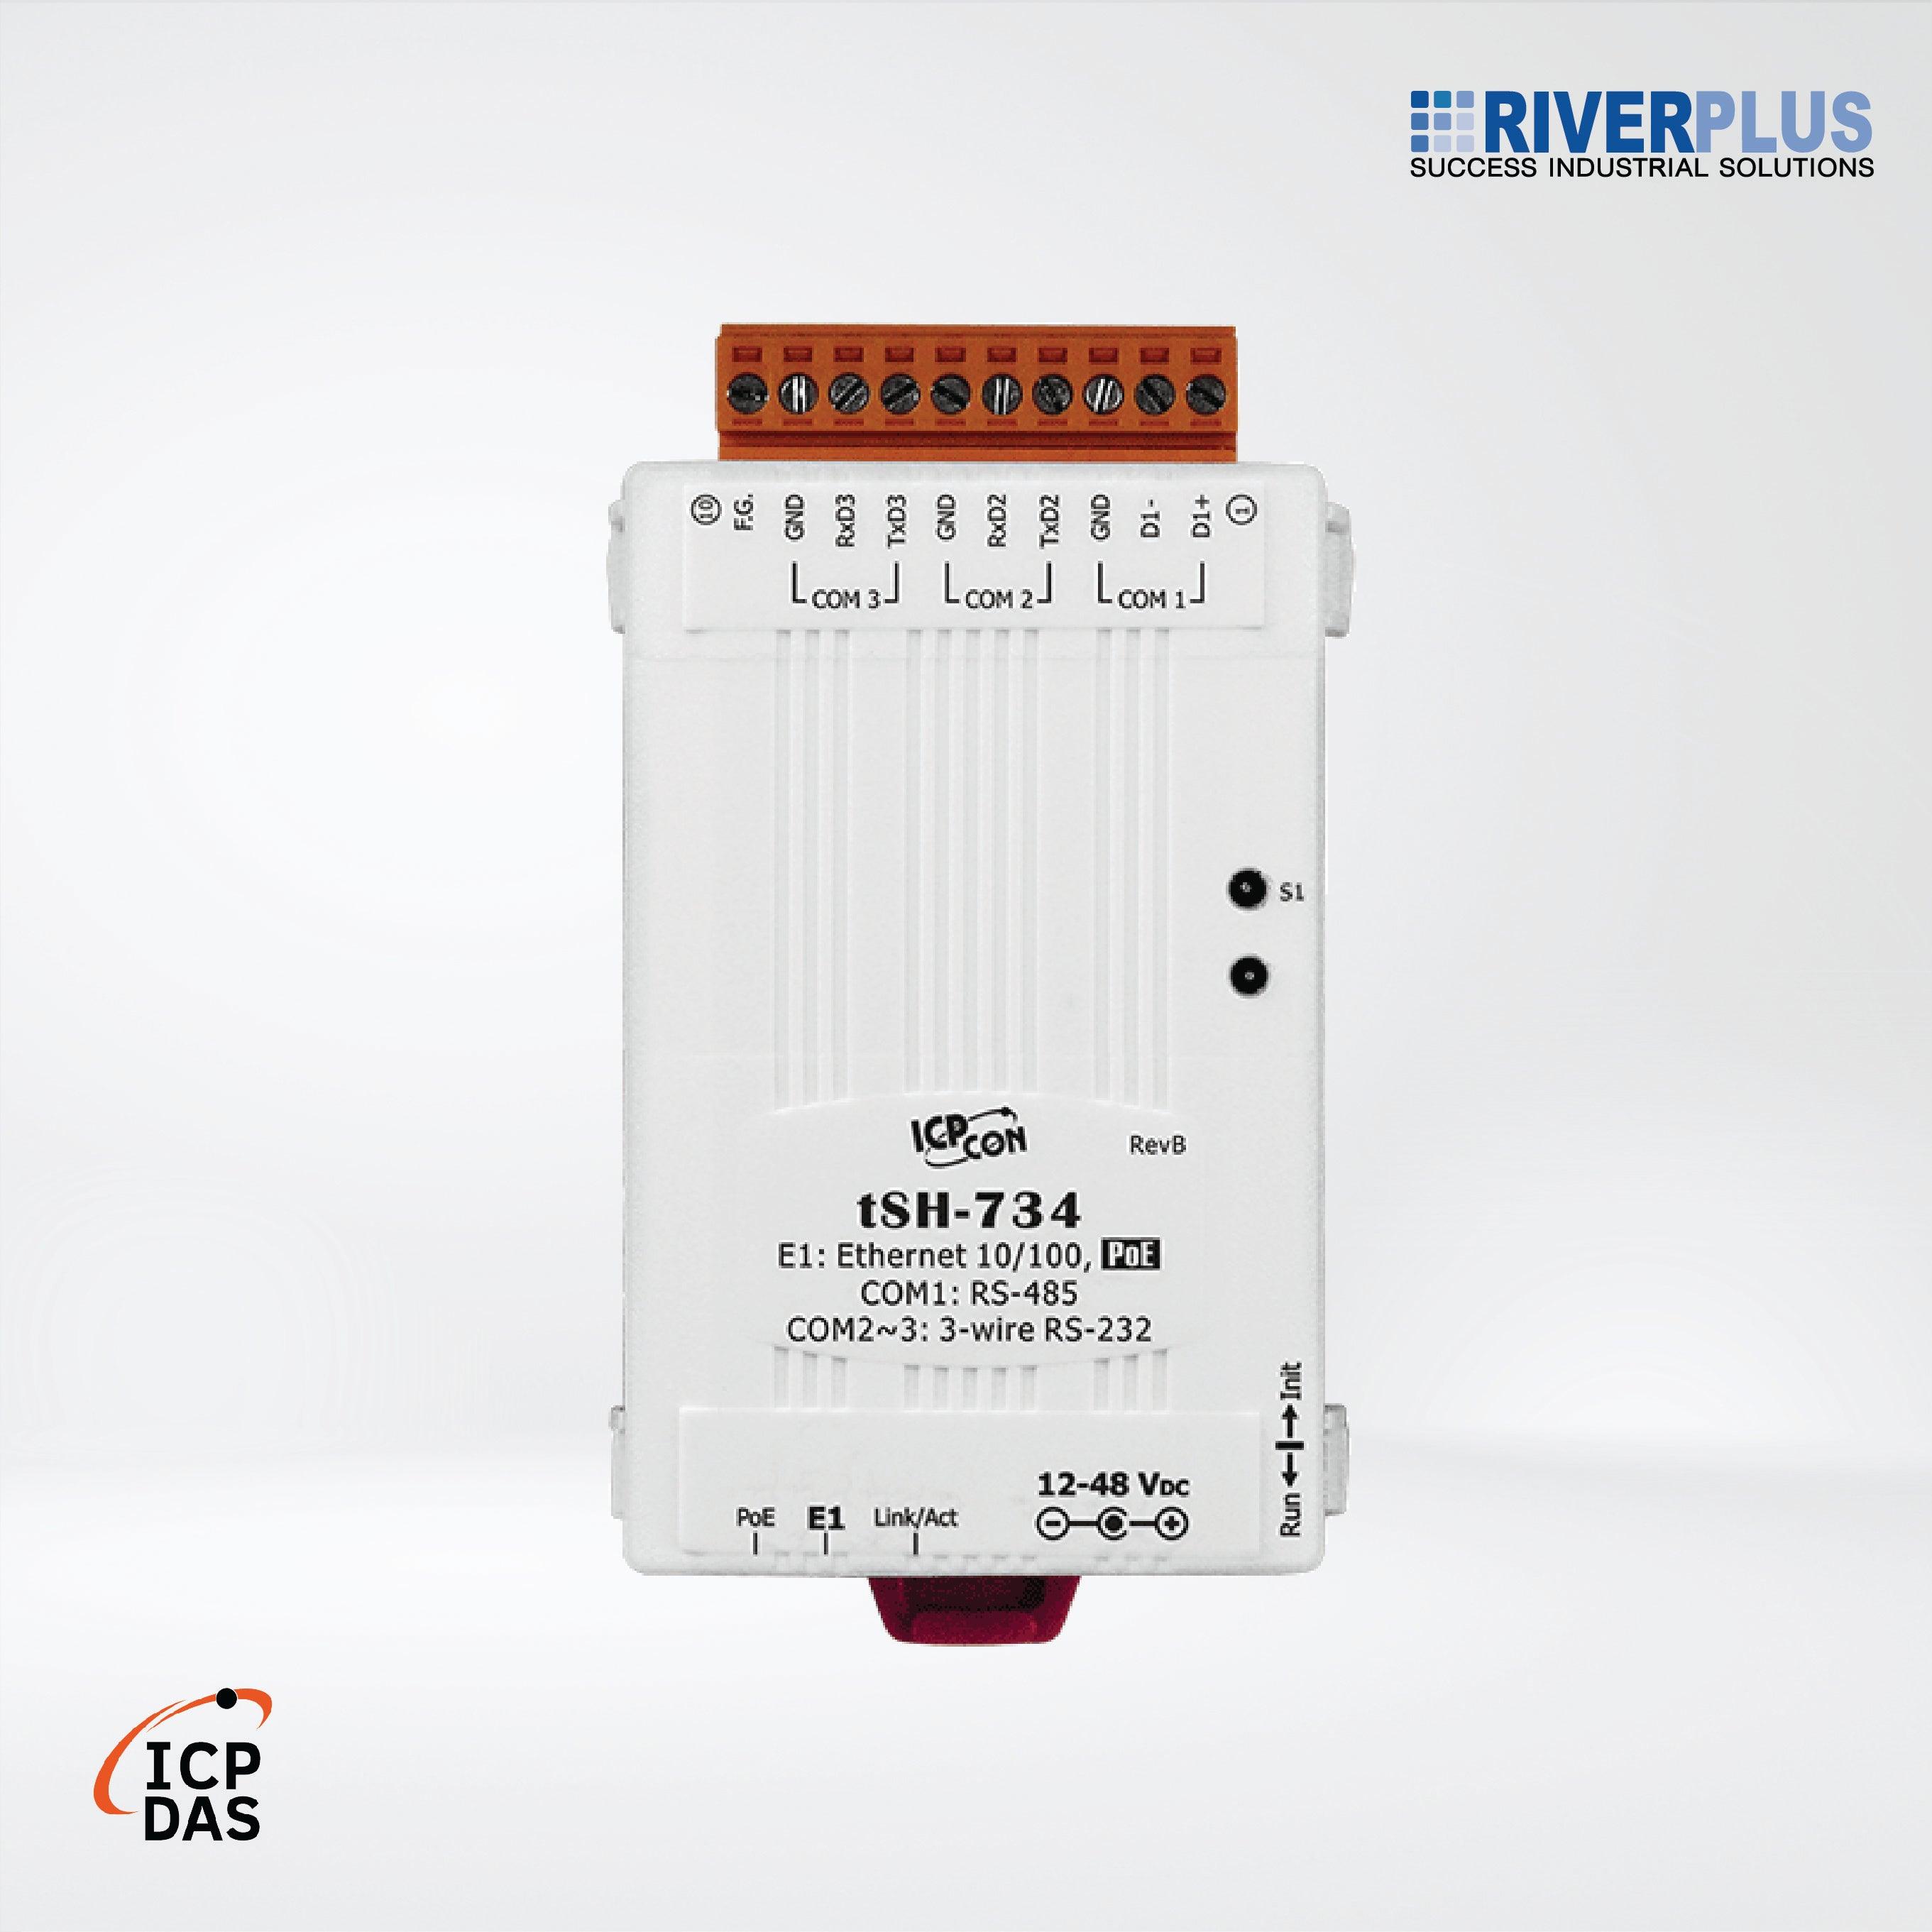 tSH-734 Tiny (2x RS-232 and 1x RS-485) Serial Port Sharer with PoE - Riverplus